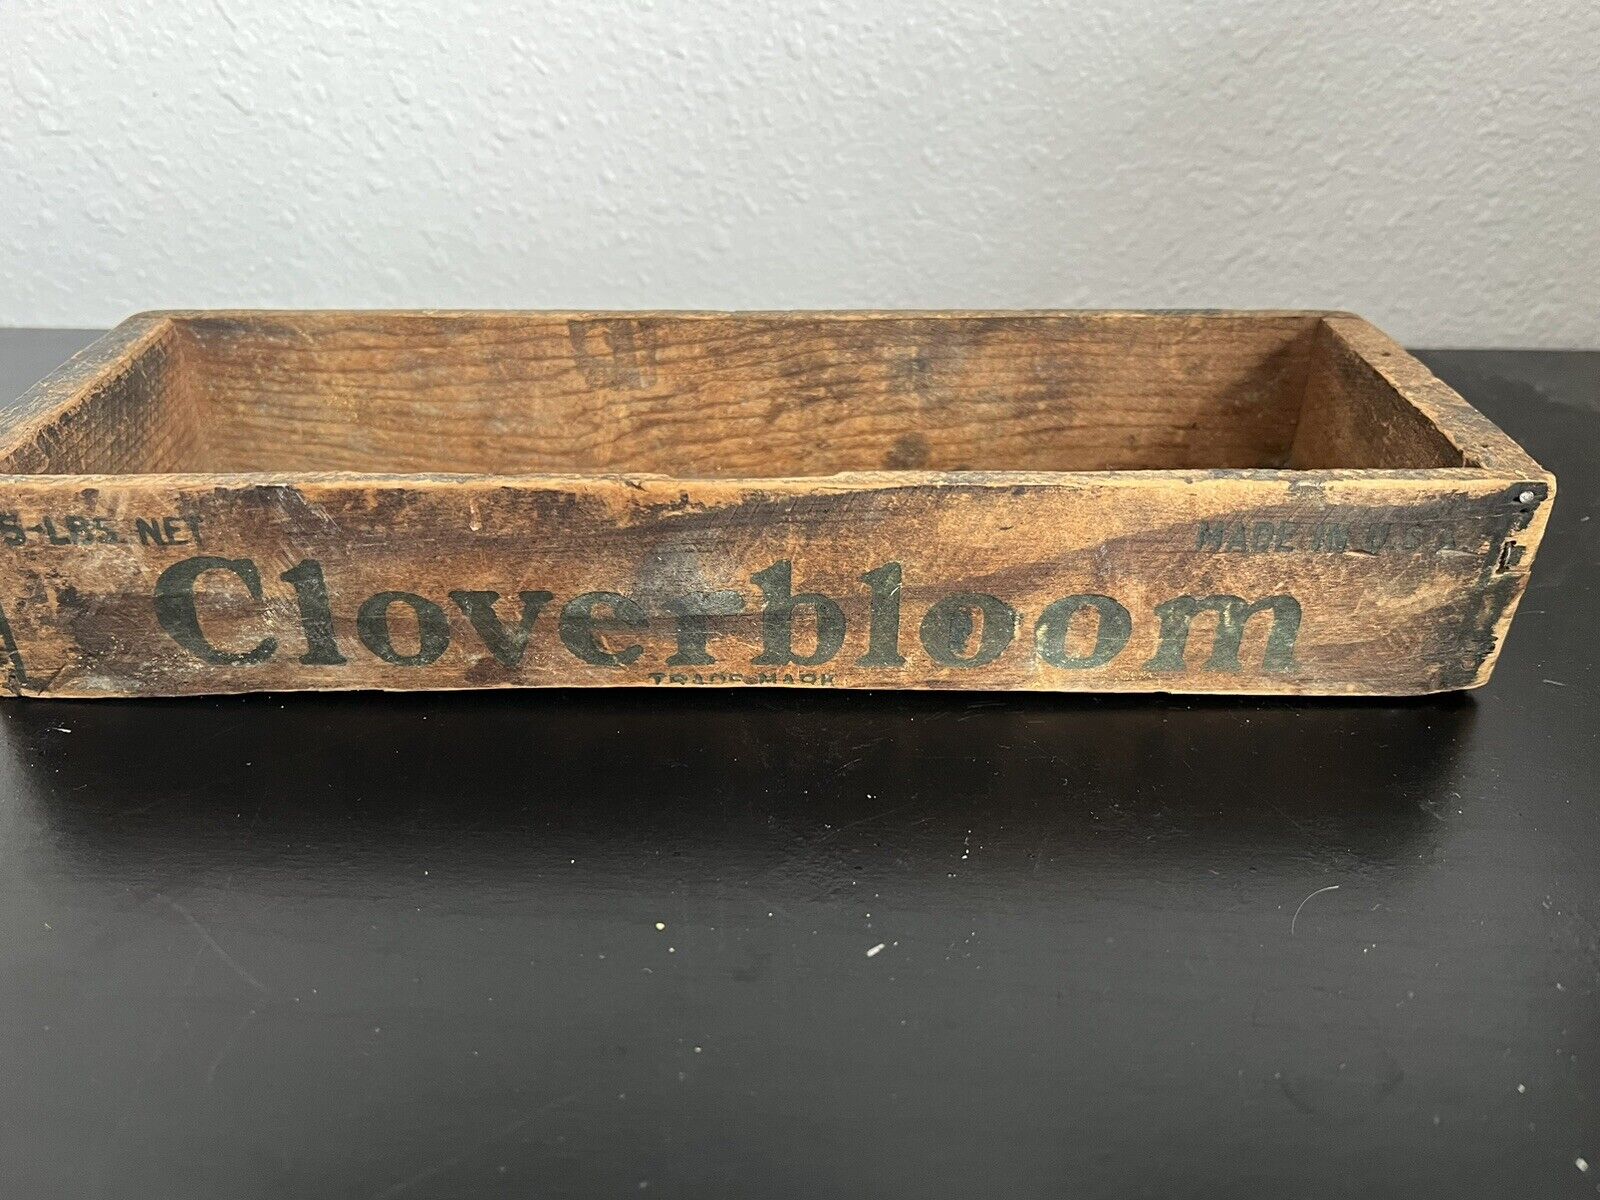 Vintage Cloverbloom Wooden Cheese Box, Primitive, Made in USA